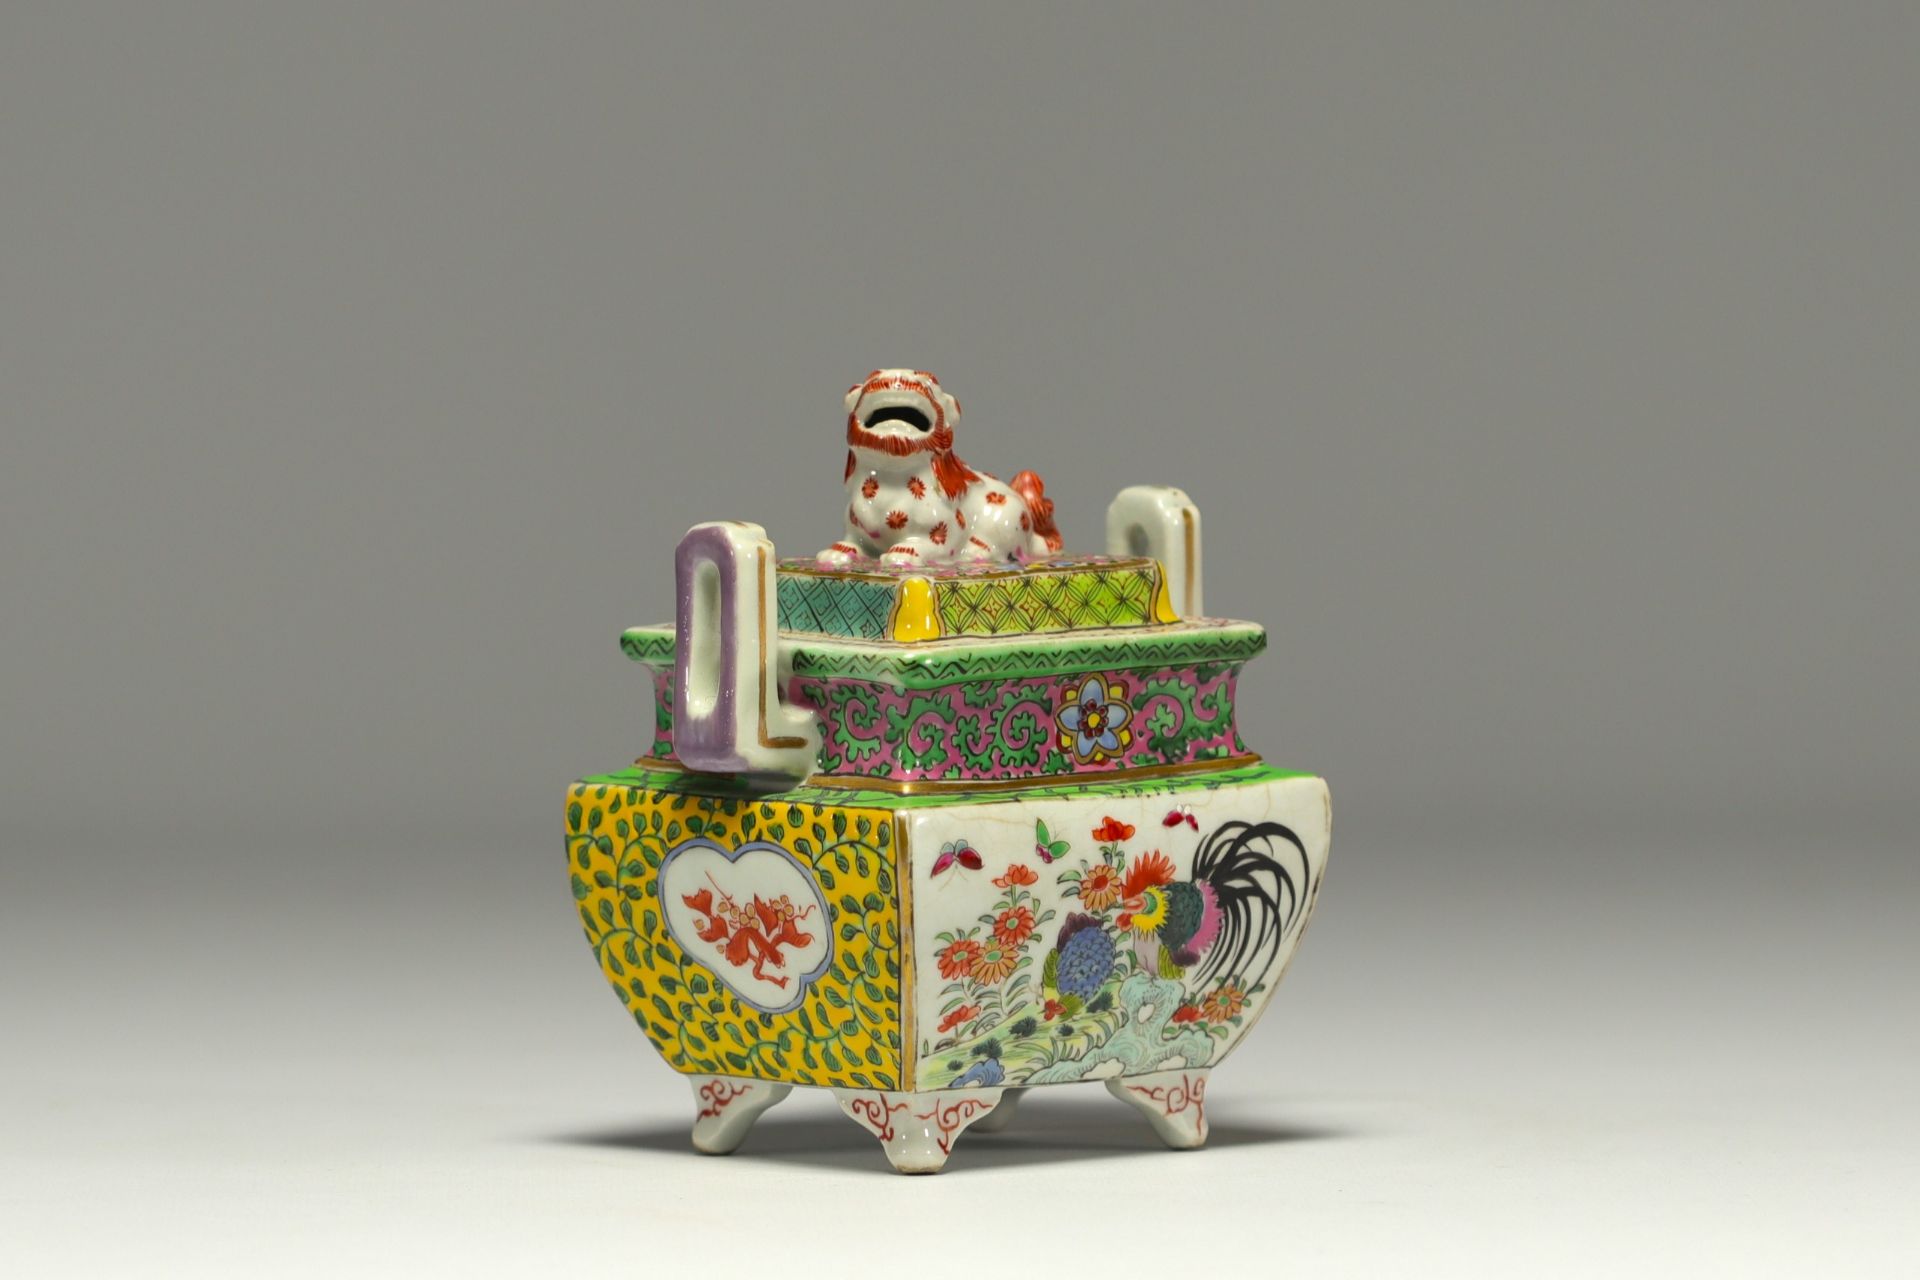 China - Small polychrome porcelain perfume burner with floral decoration, rooster and Fo dog.